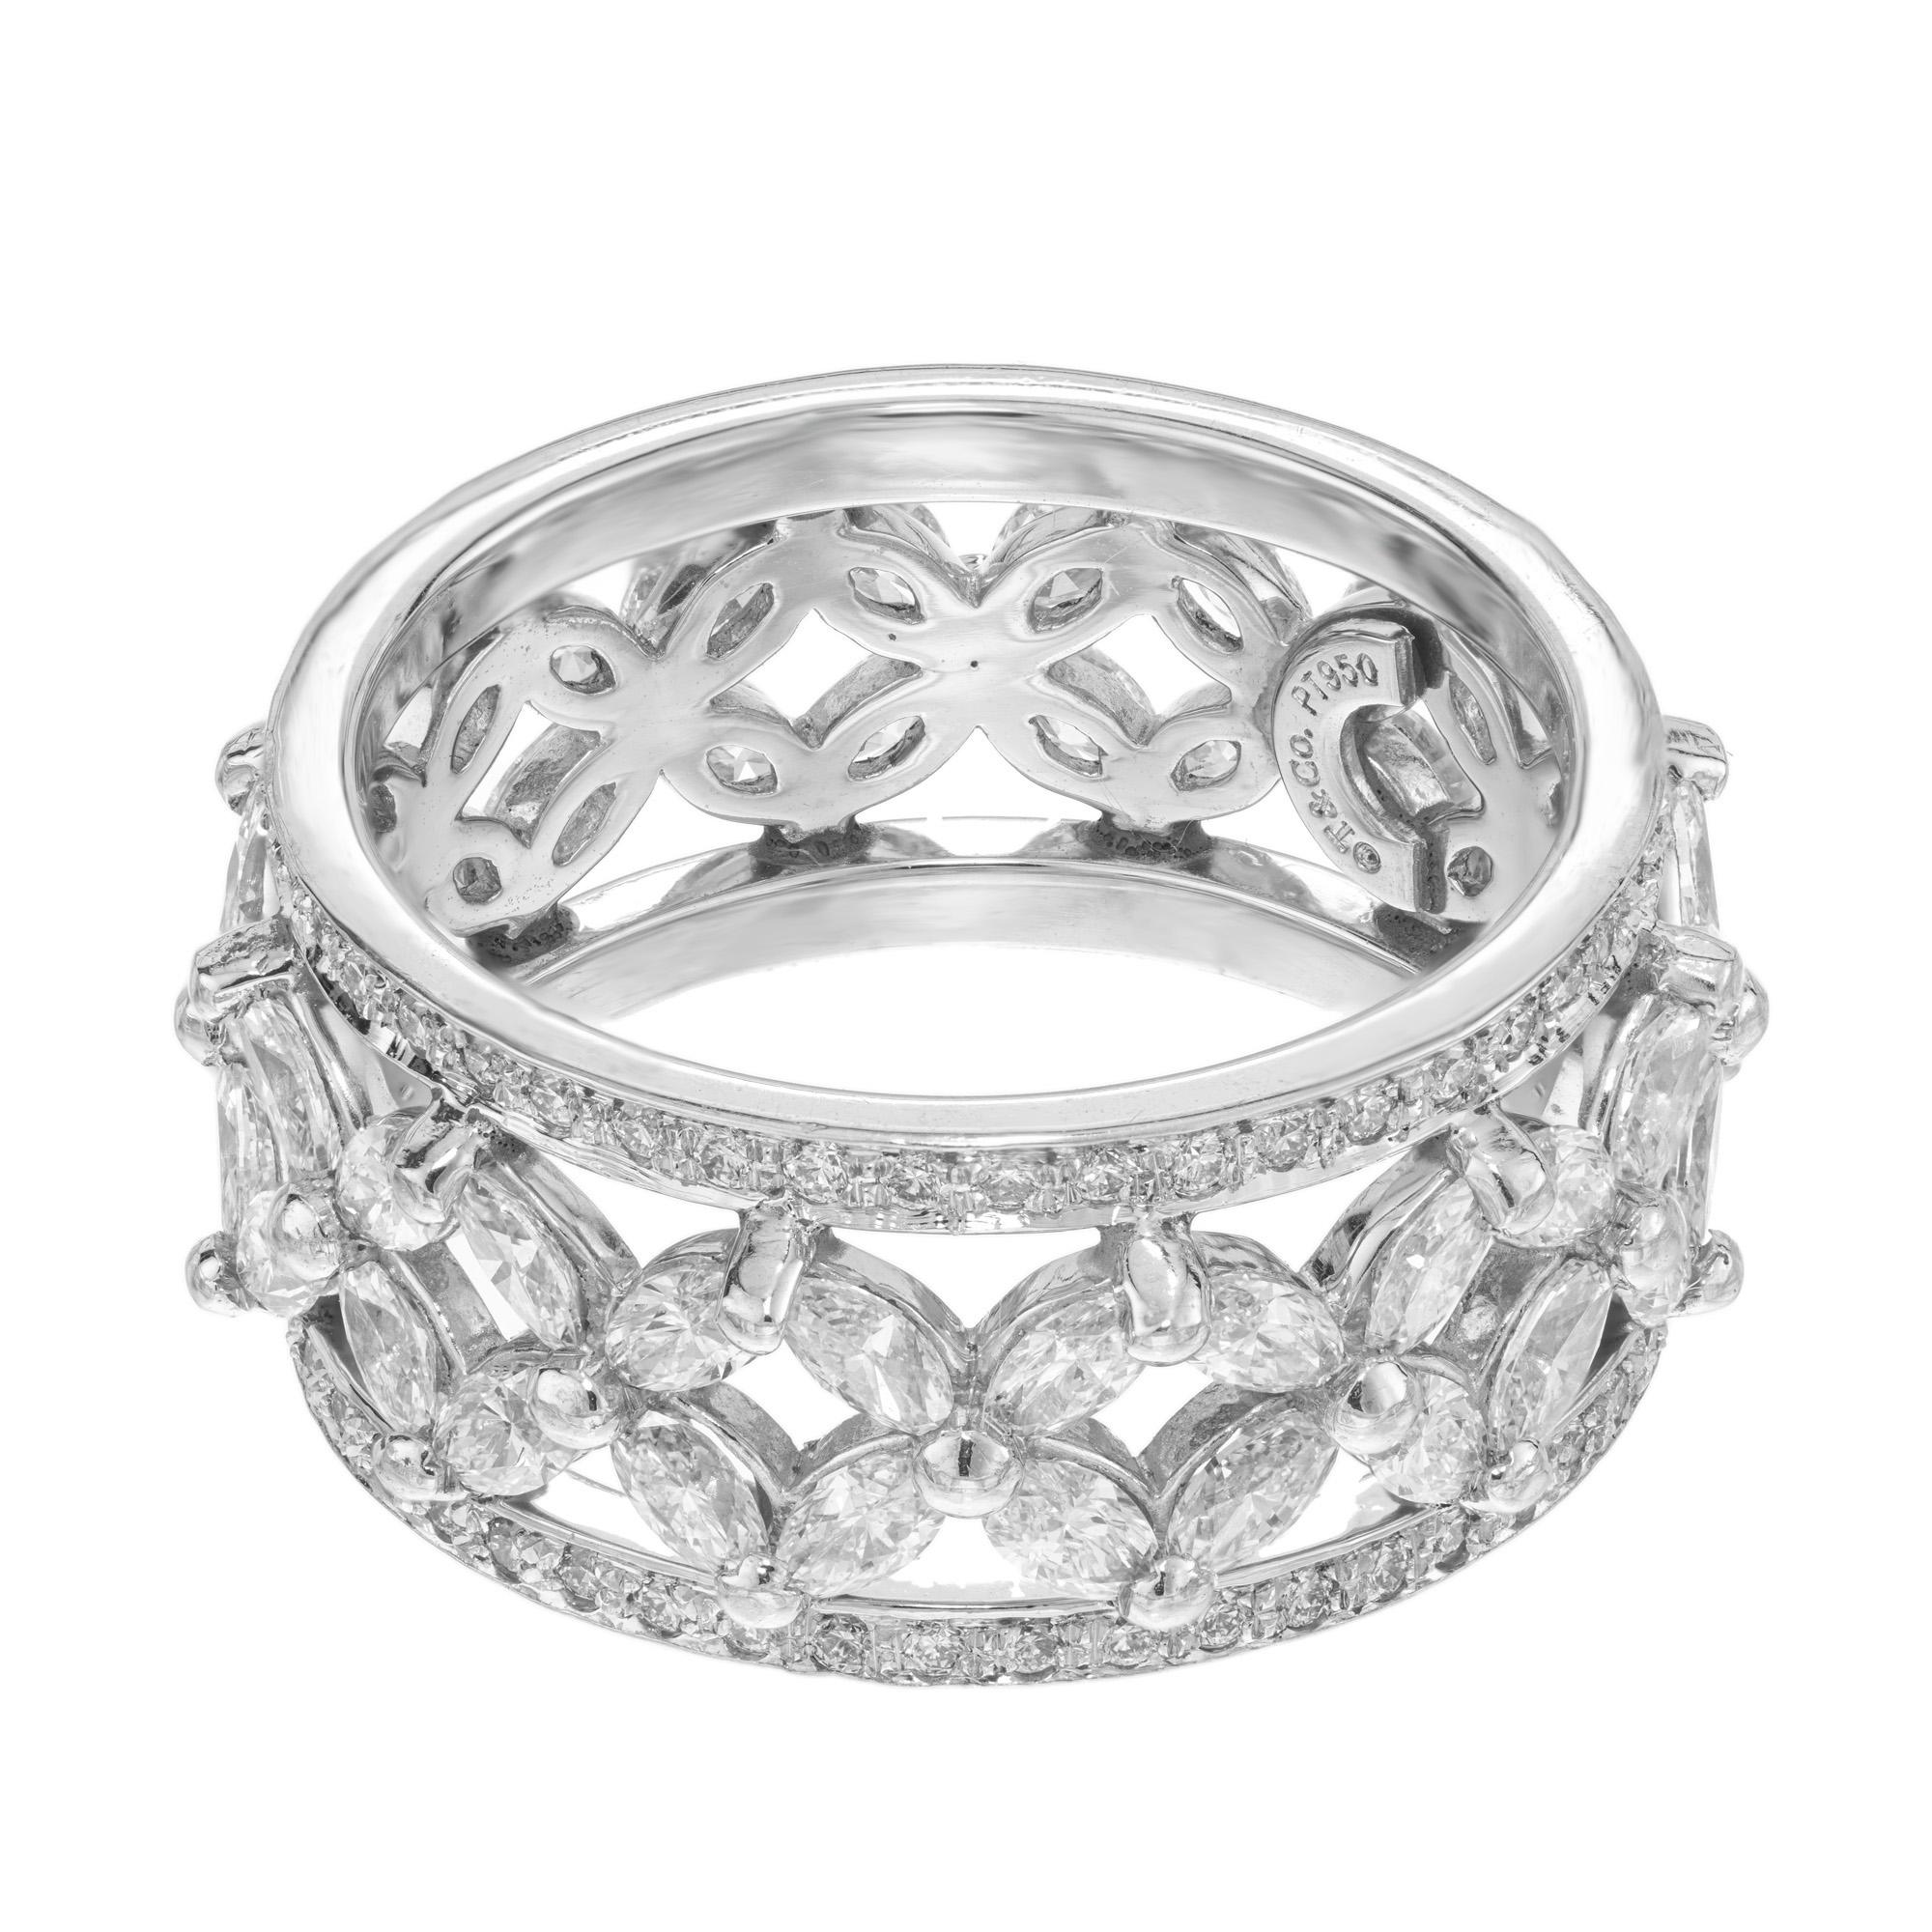 Excellent Tiffany & Co Victoria platinum band ring. Stunning with magnificent brilliance. This Tiffany classic is adorned with 48 marquise cut diamonds with an approximate total carat weighty of 2.00cts. Accented with 91 round brilliant cut diamonds